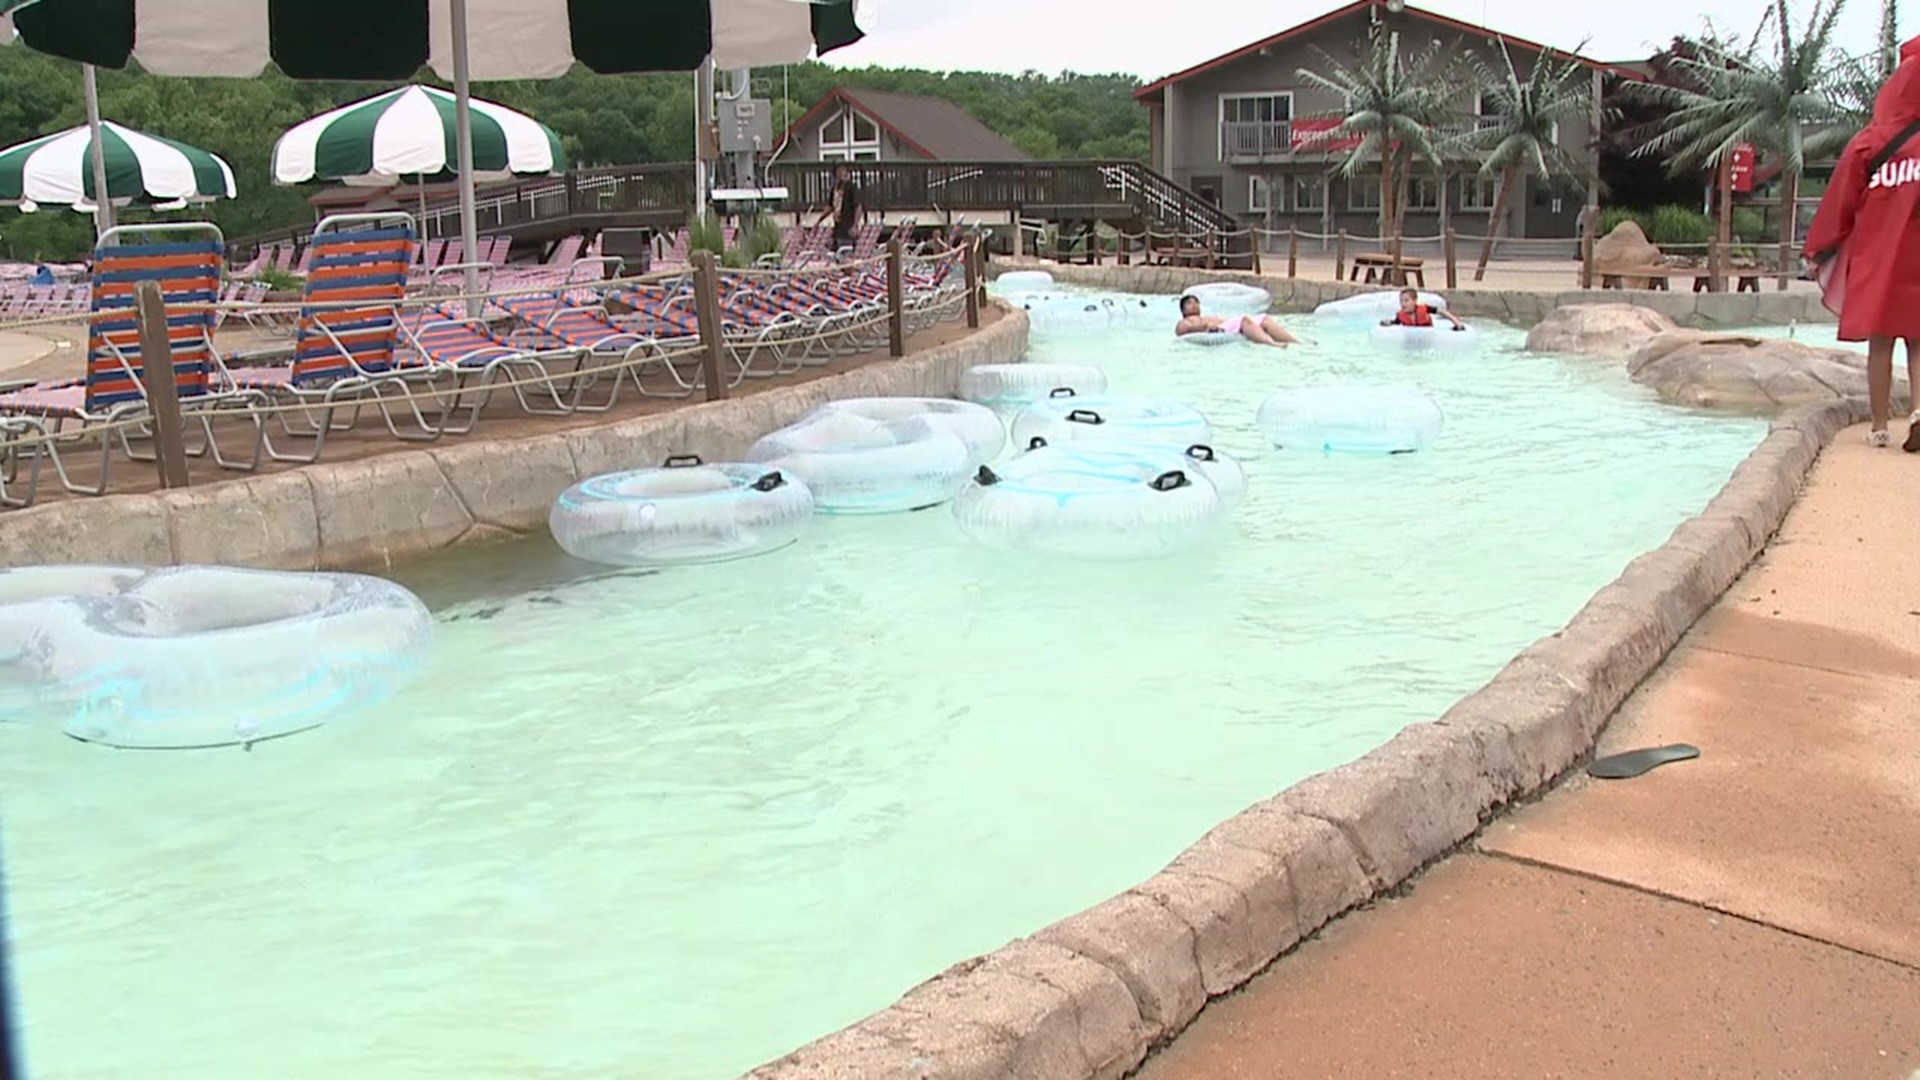 Opening day at the state's largest outdoor water park started on the cool side.